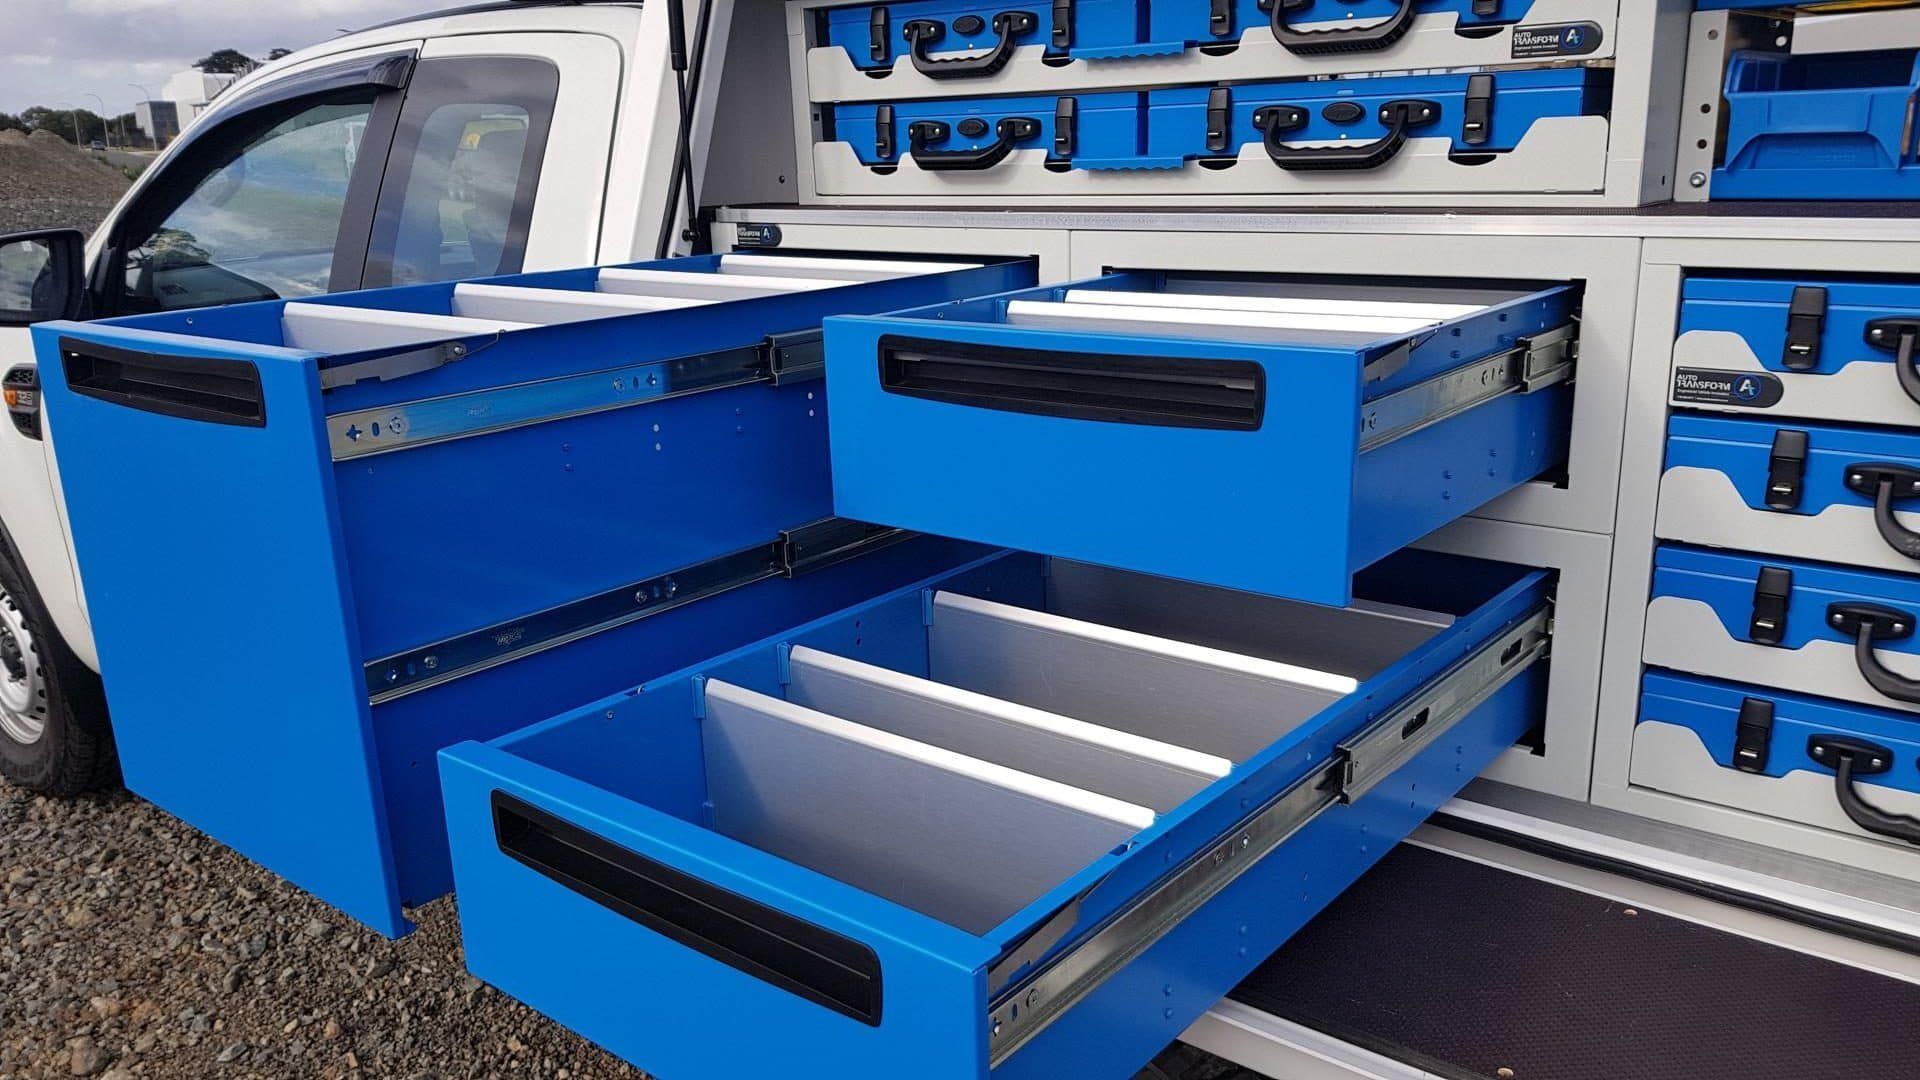 Modular tool drawer system for ute service body